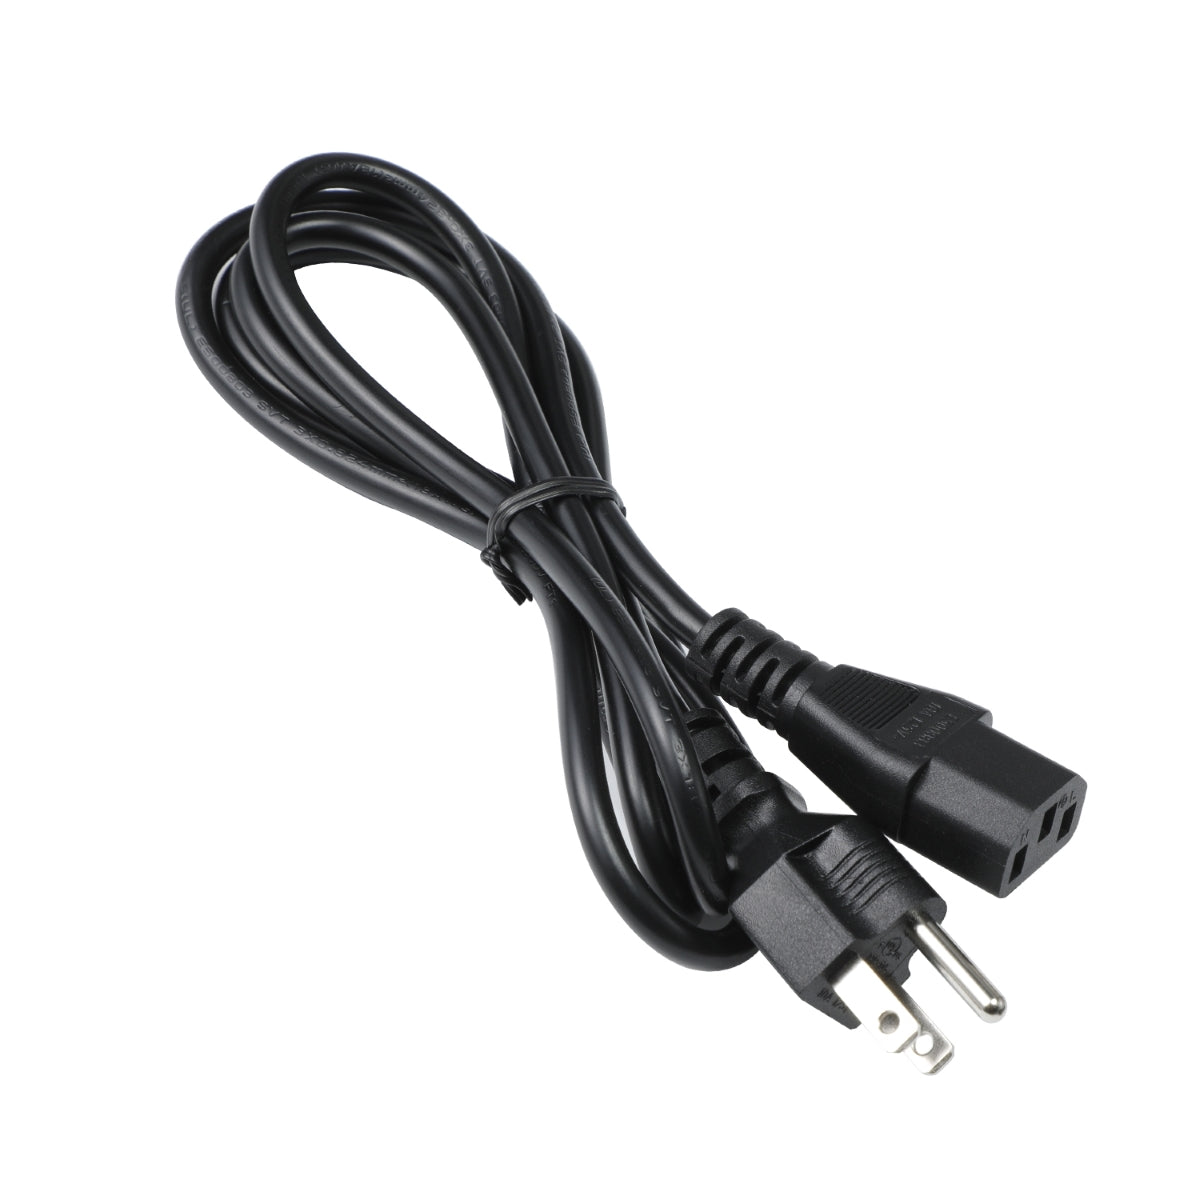 Power Cord for ViewSonic VX2252mh Monitor